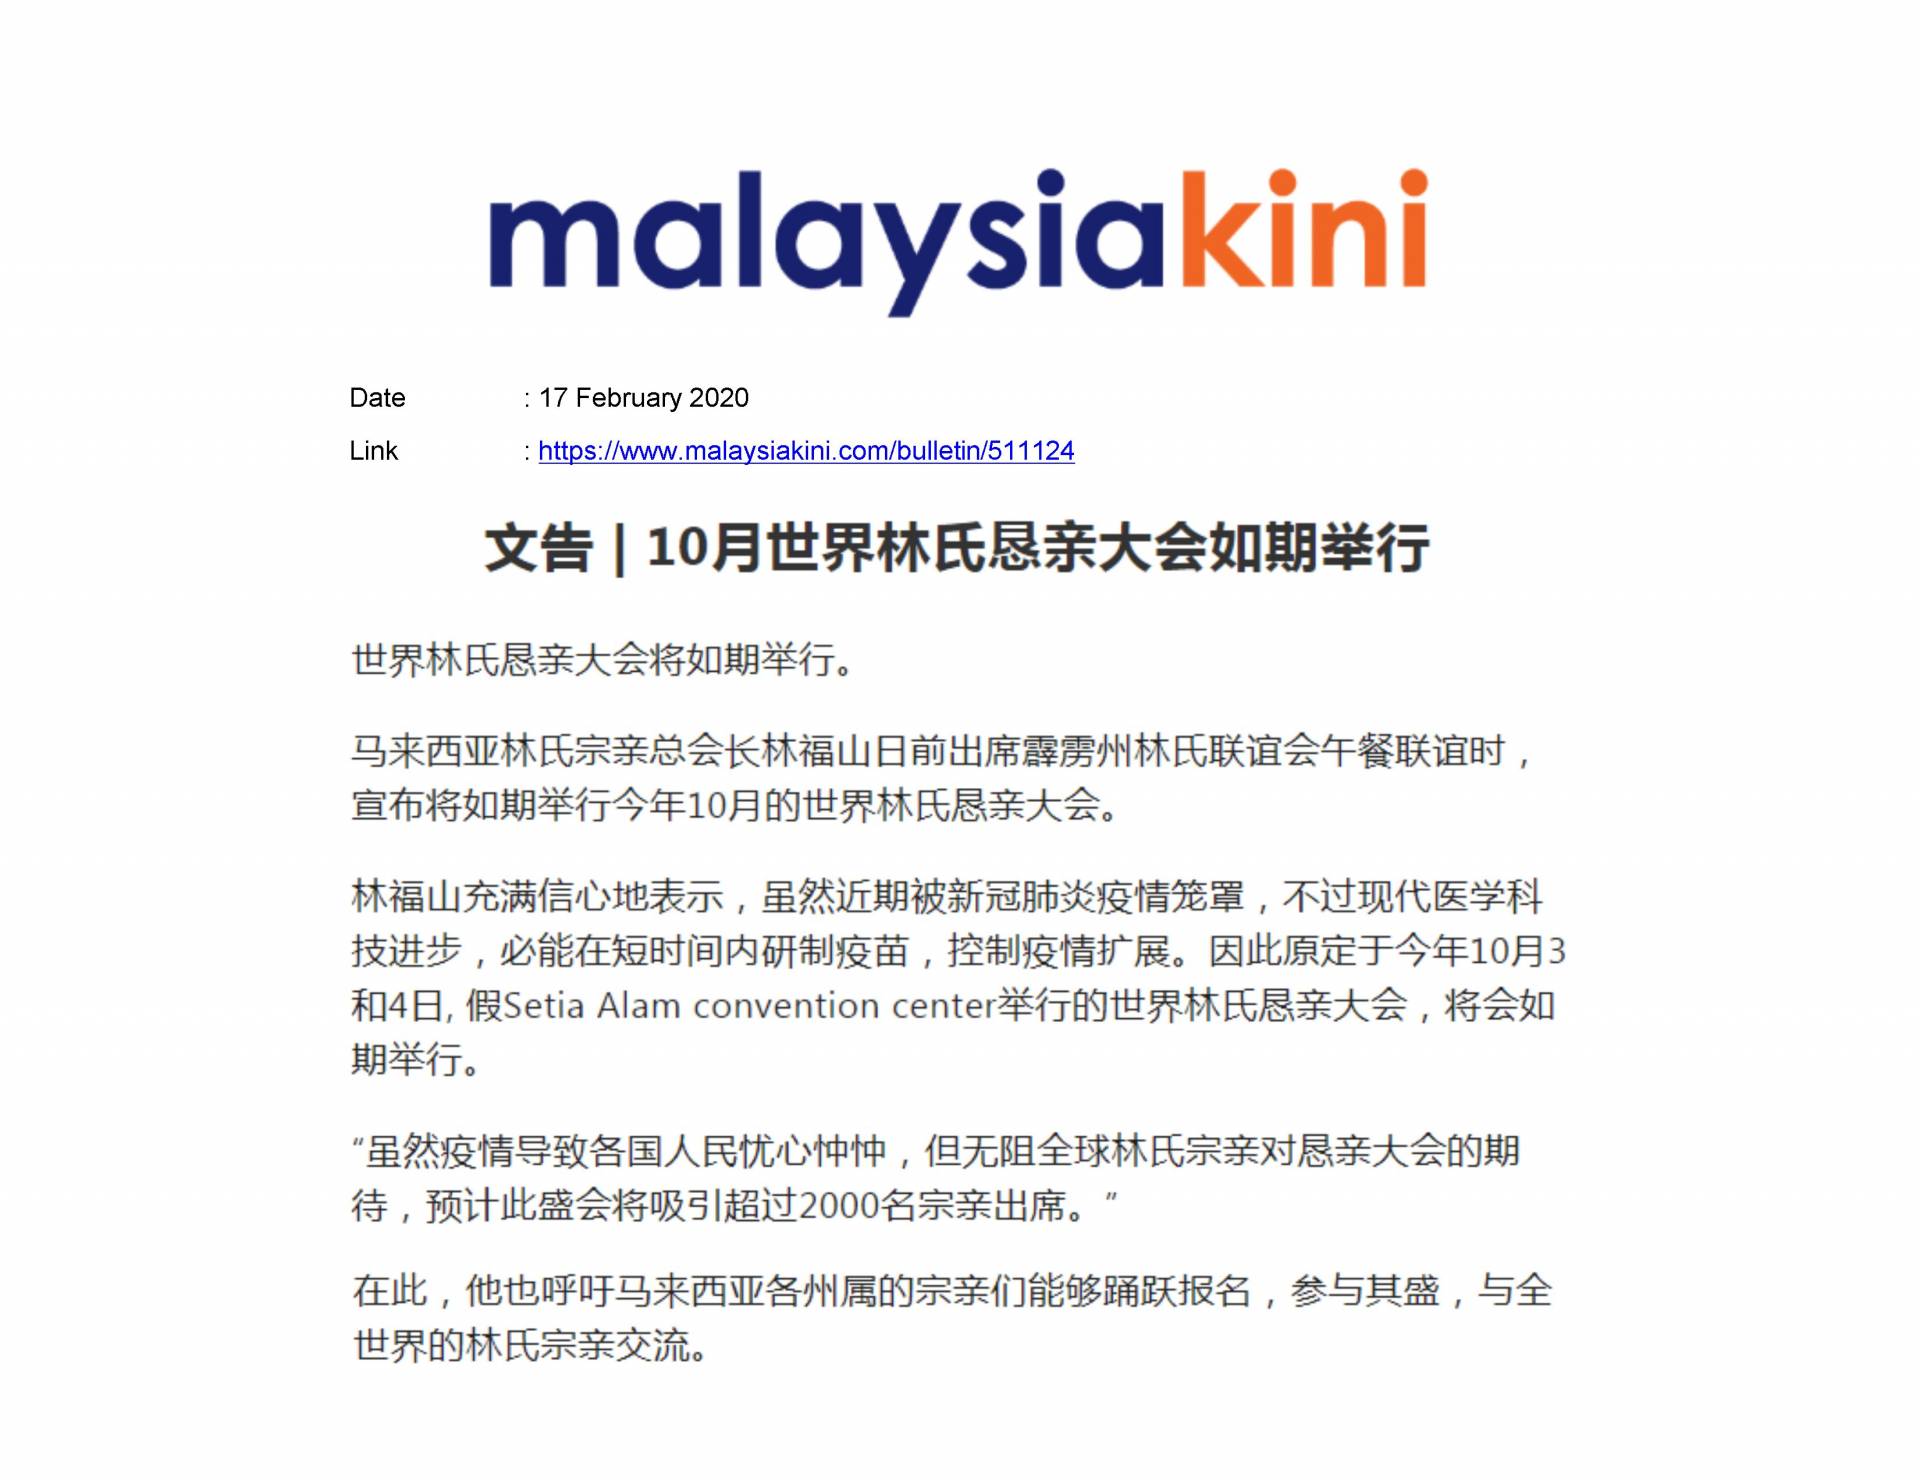 2020.02.17 Malaysiakini - October World Lim‘s Association meeting goes on as scheduled